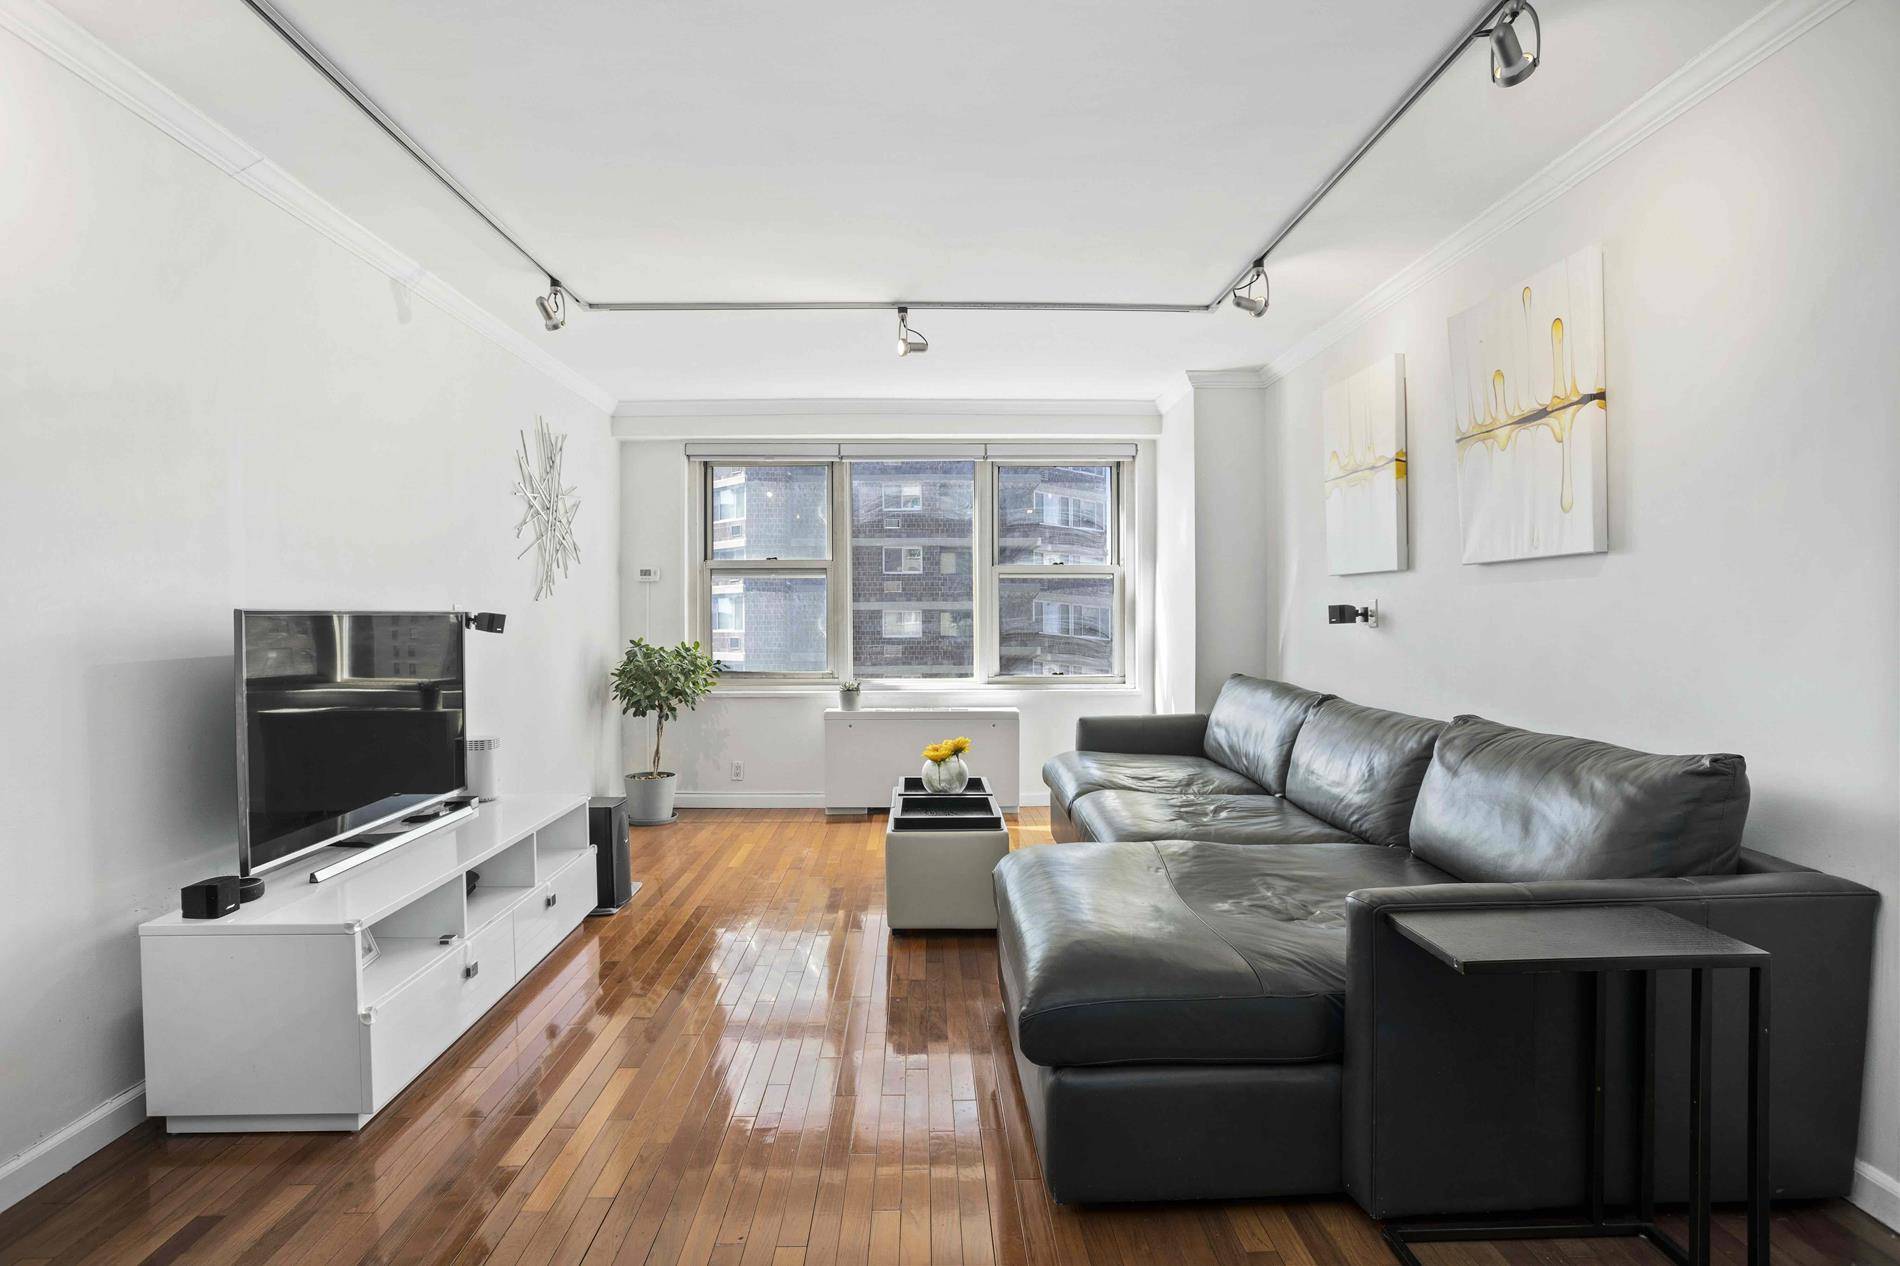 MOVE IN READY ! This one of a kind, south facing extra large one bedroom offers an abundance of sunlight and views downtown including the Freedom Tower !